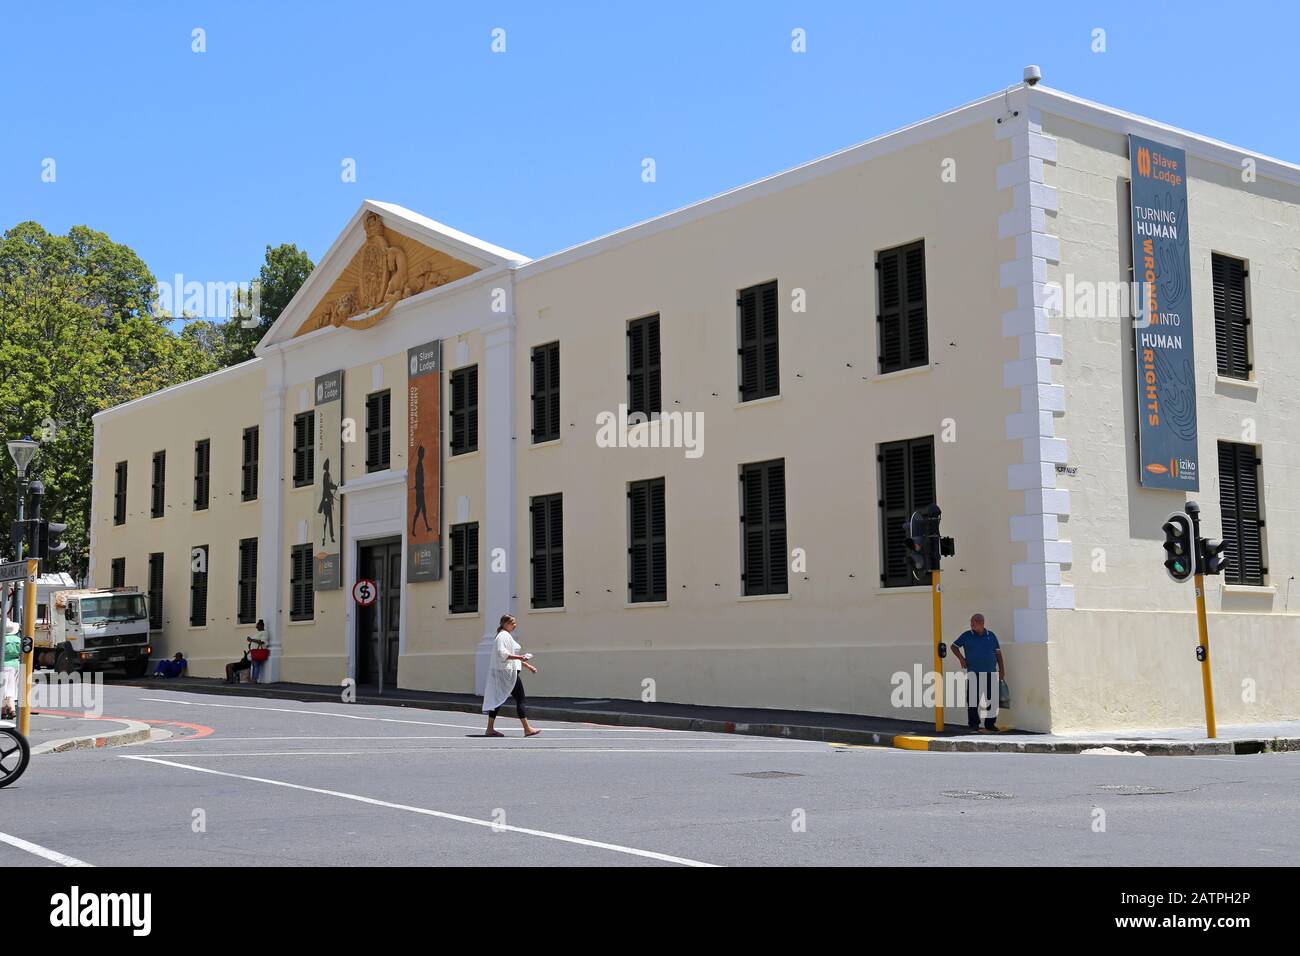 Iziko Slave Lodge, Parliament Street, Central Business District, Cape Town, Table Bay, Western Cape Province, South Africa, Africa Stock Photo